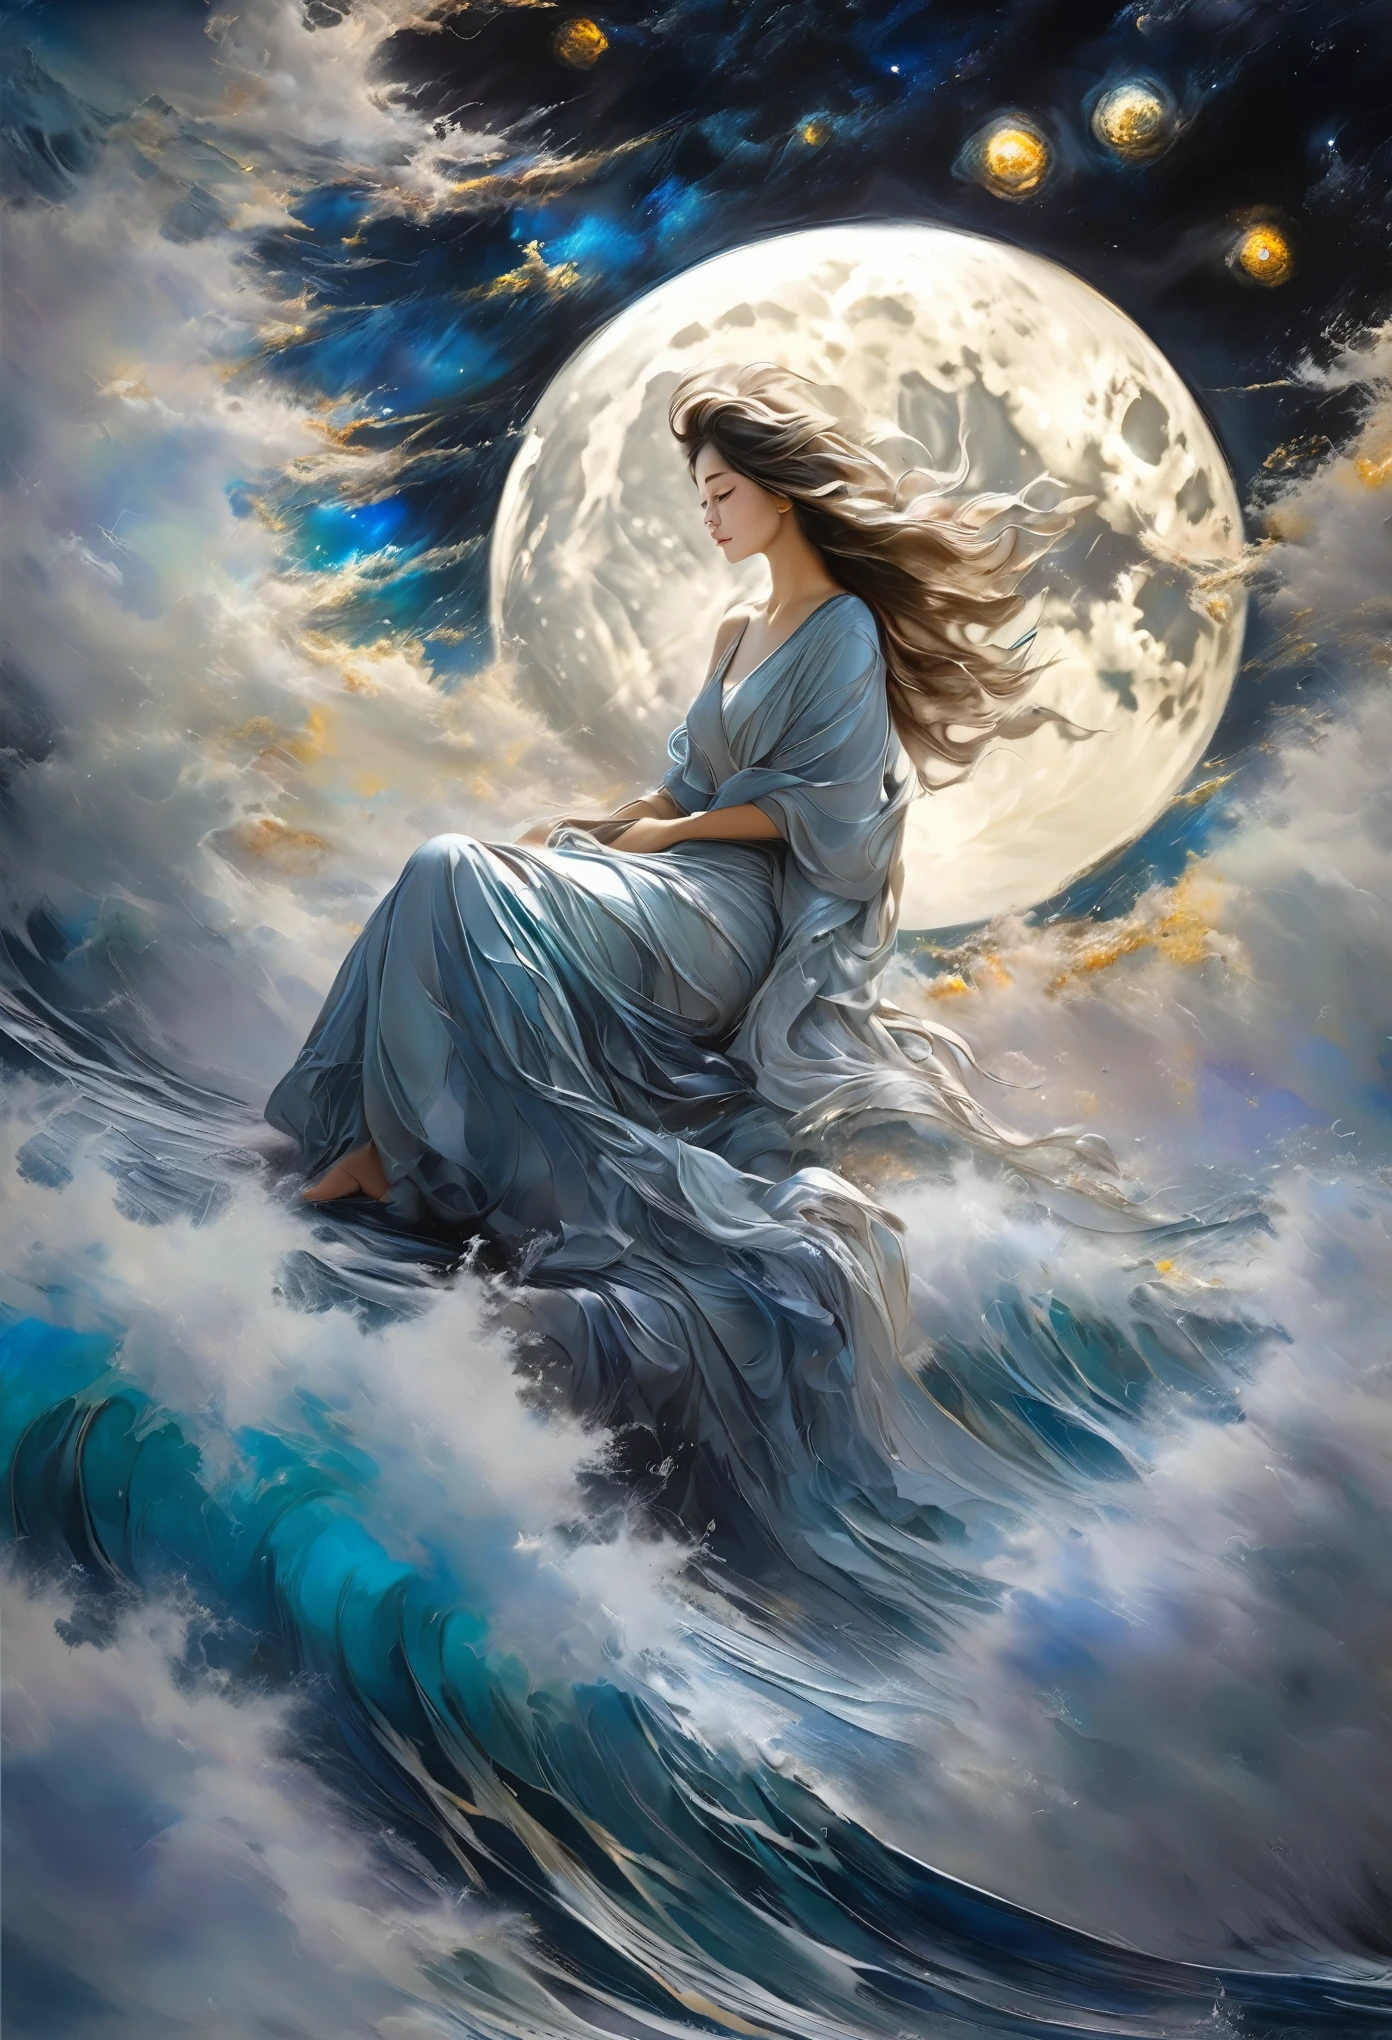 best quality, super fine, 16k, masterpiece, RAW photo, photorealistic, A three-dimensional depiction of undulating oil paintings, fusion of watercolors and oil paintings, combination of monochrome and color, the ocean and the galaxy universe in the big full moon during the day, beautiful fantasy woman seated in the air, outstanding image effects, wonderful work of art